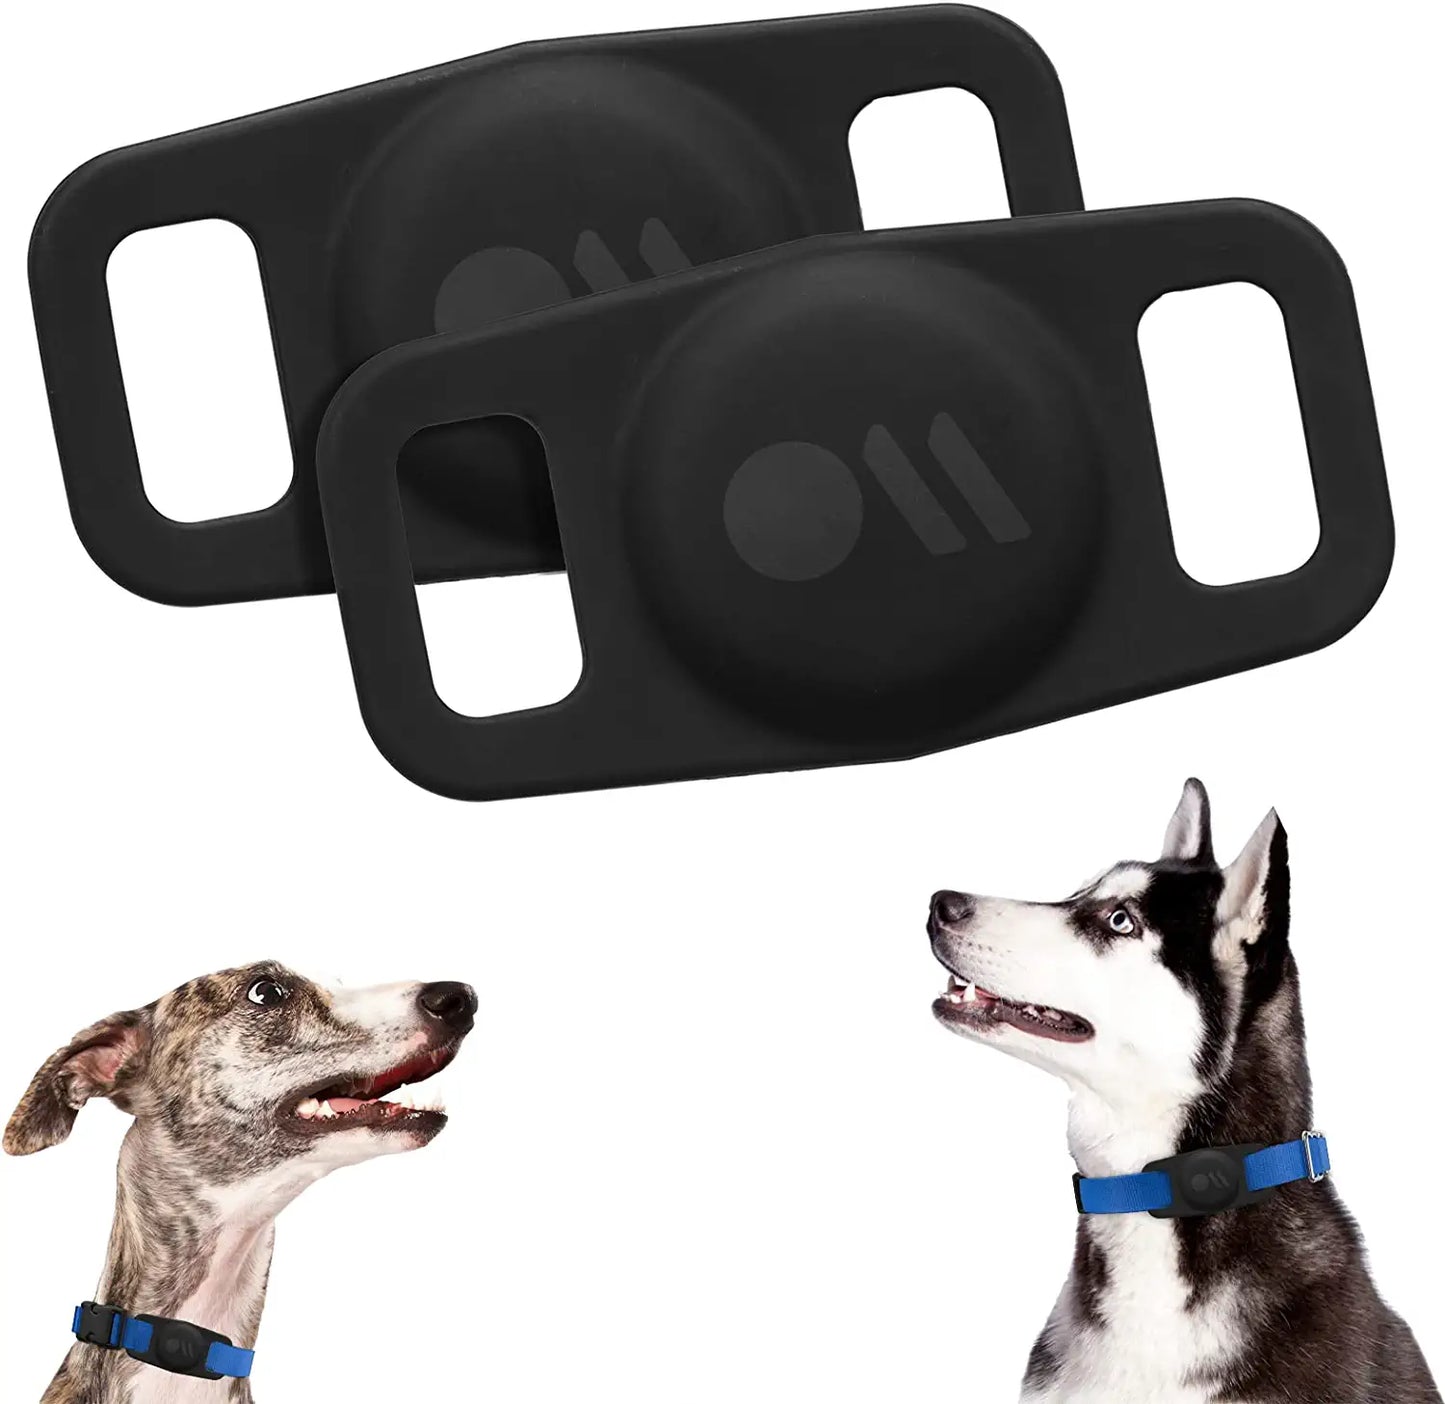 Case-Mate Protective Airtag Case for Dog Collar, Anti-Lost Airtag Loop for Dog GPS Tracker, Airtag Case Compatible with Cat/Dog Collar, (Black)